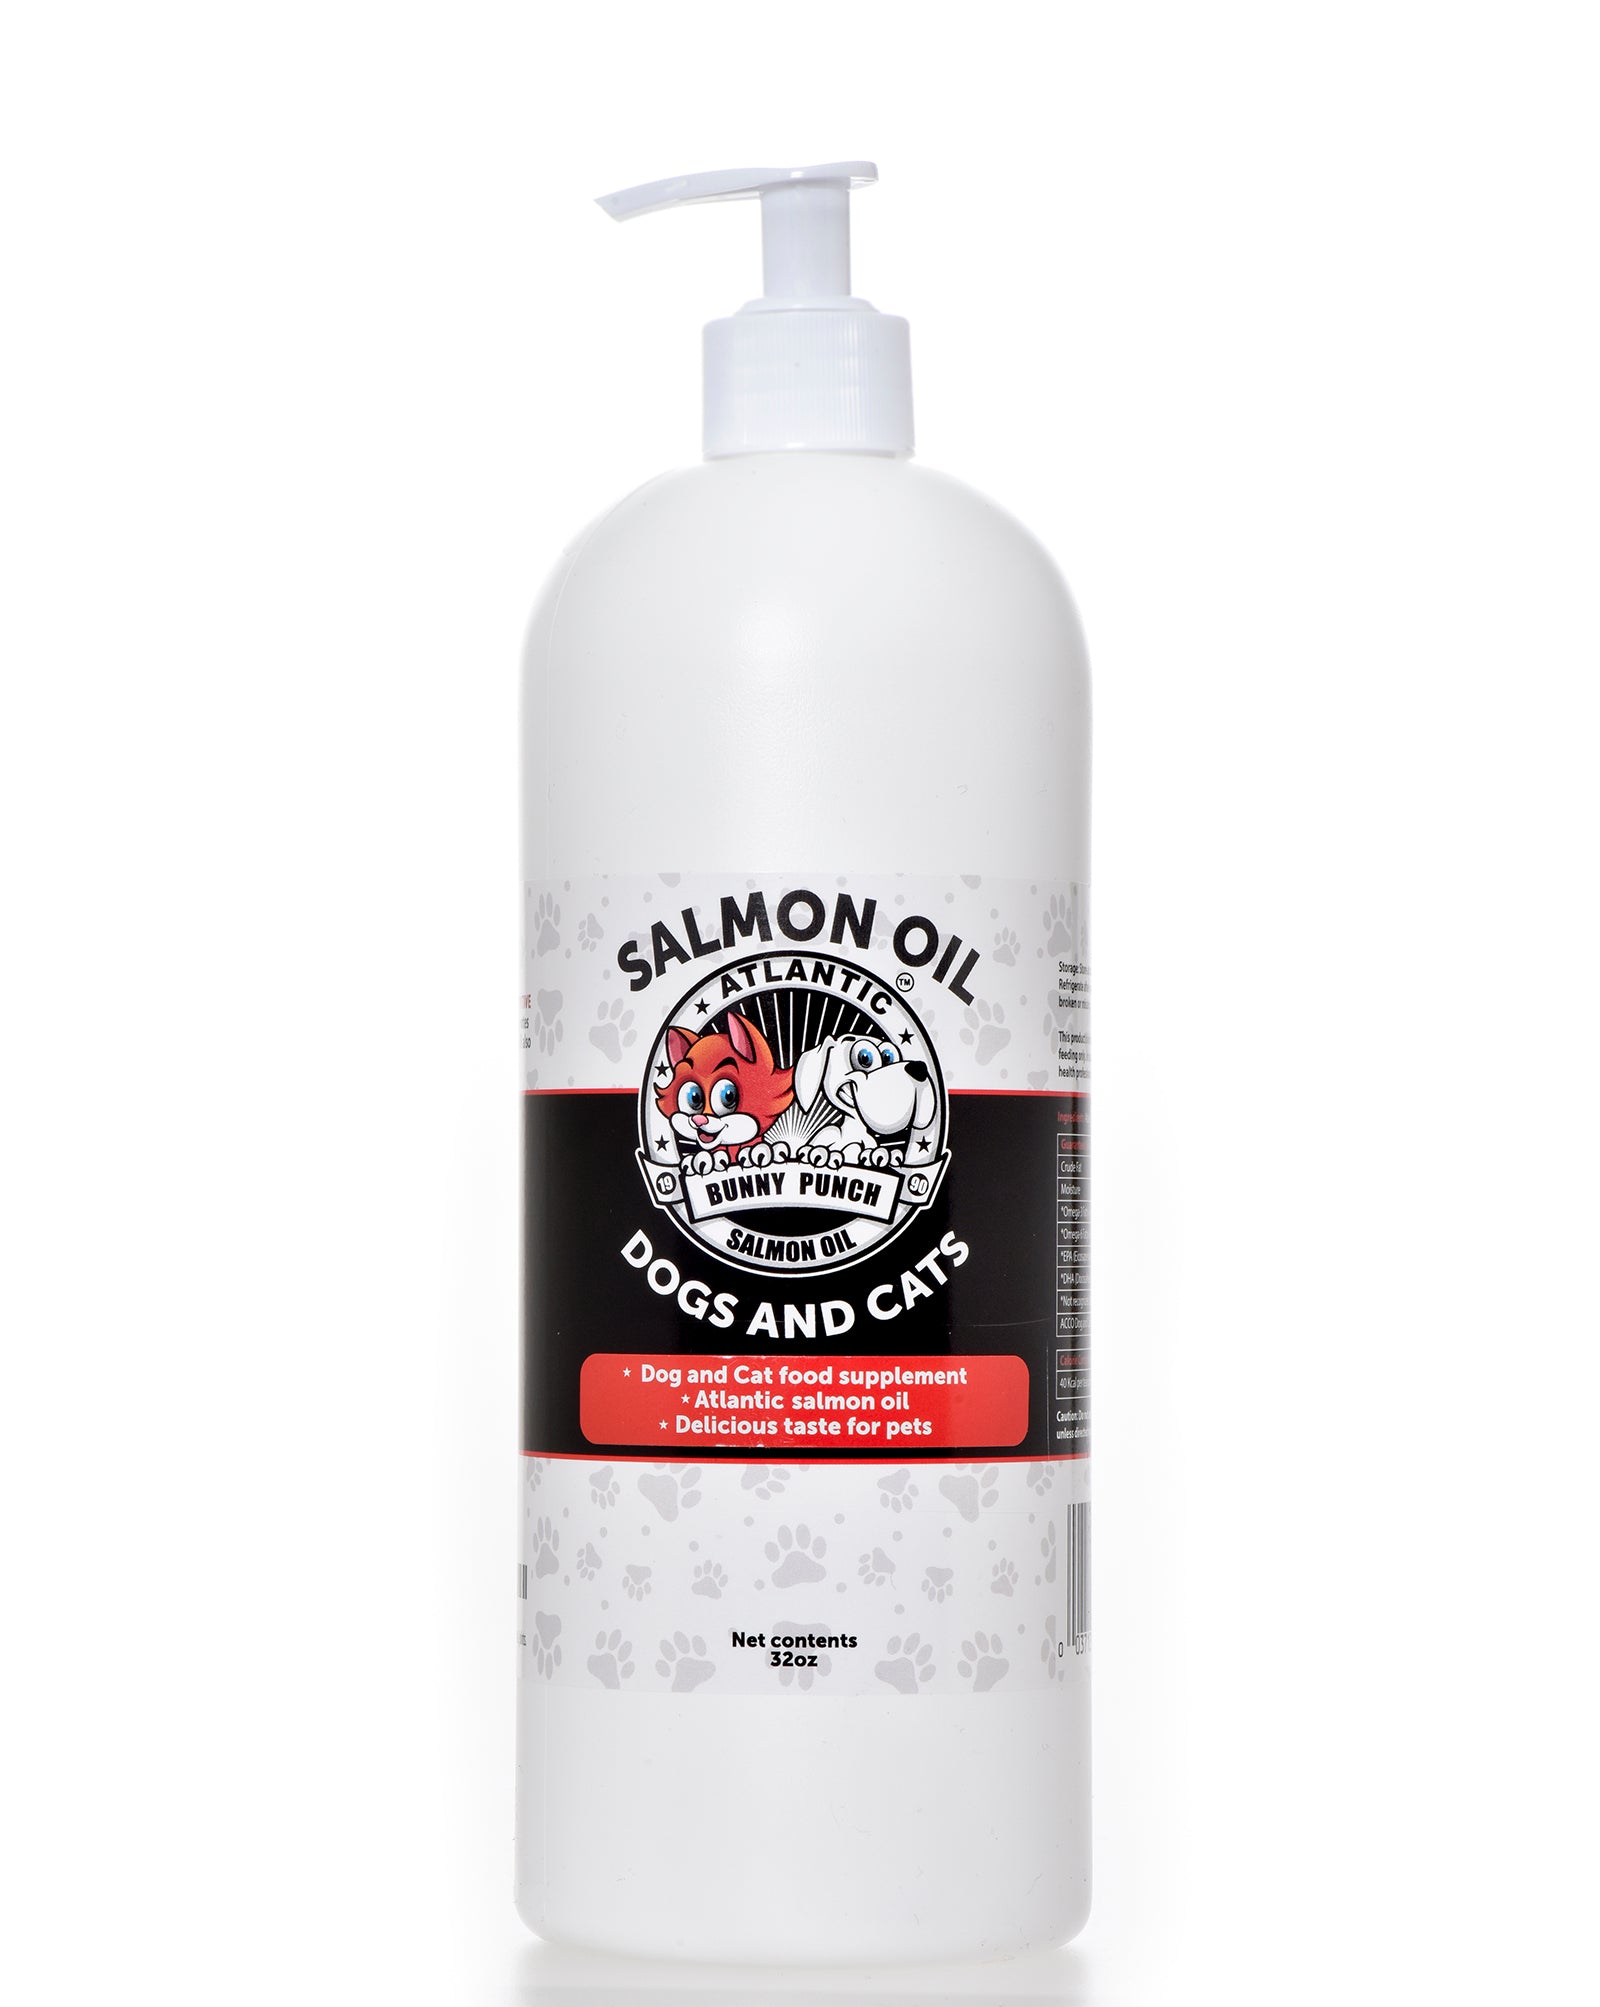 Bunny Punch Salmon Oil For Dogs And Cats